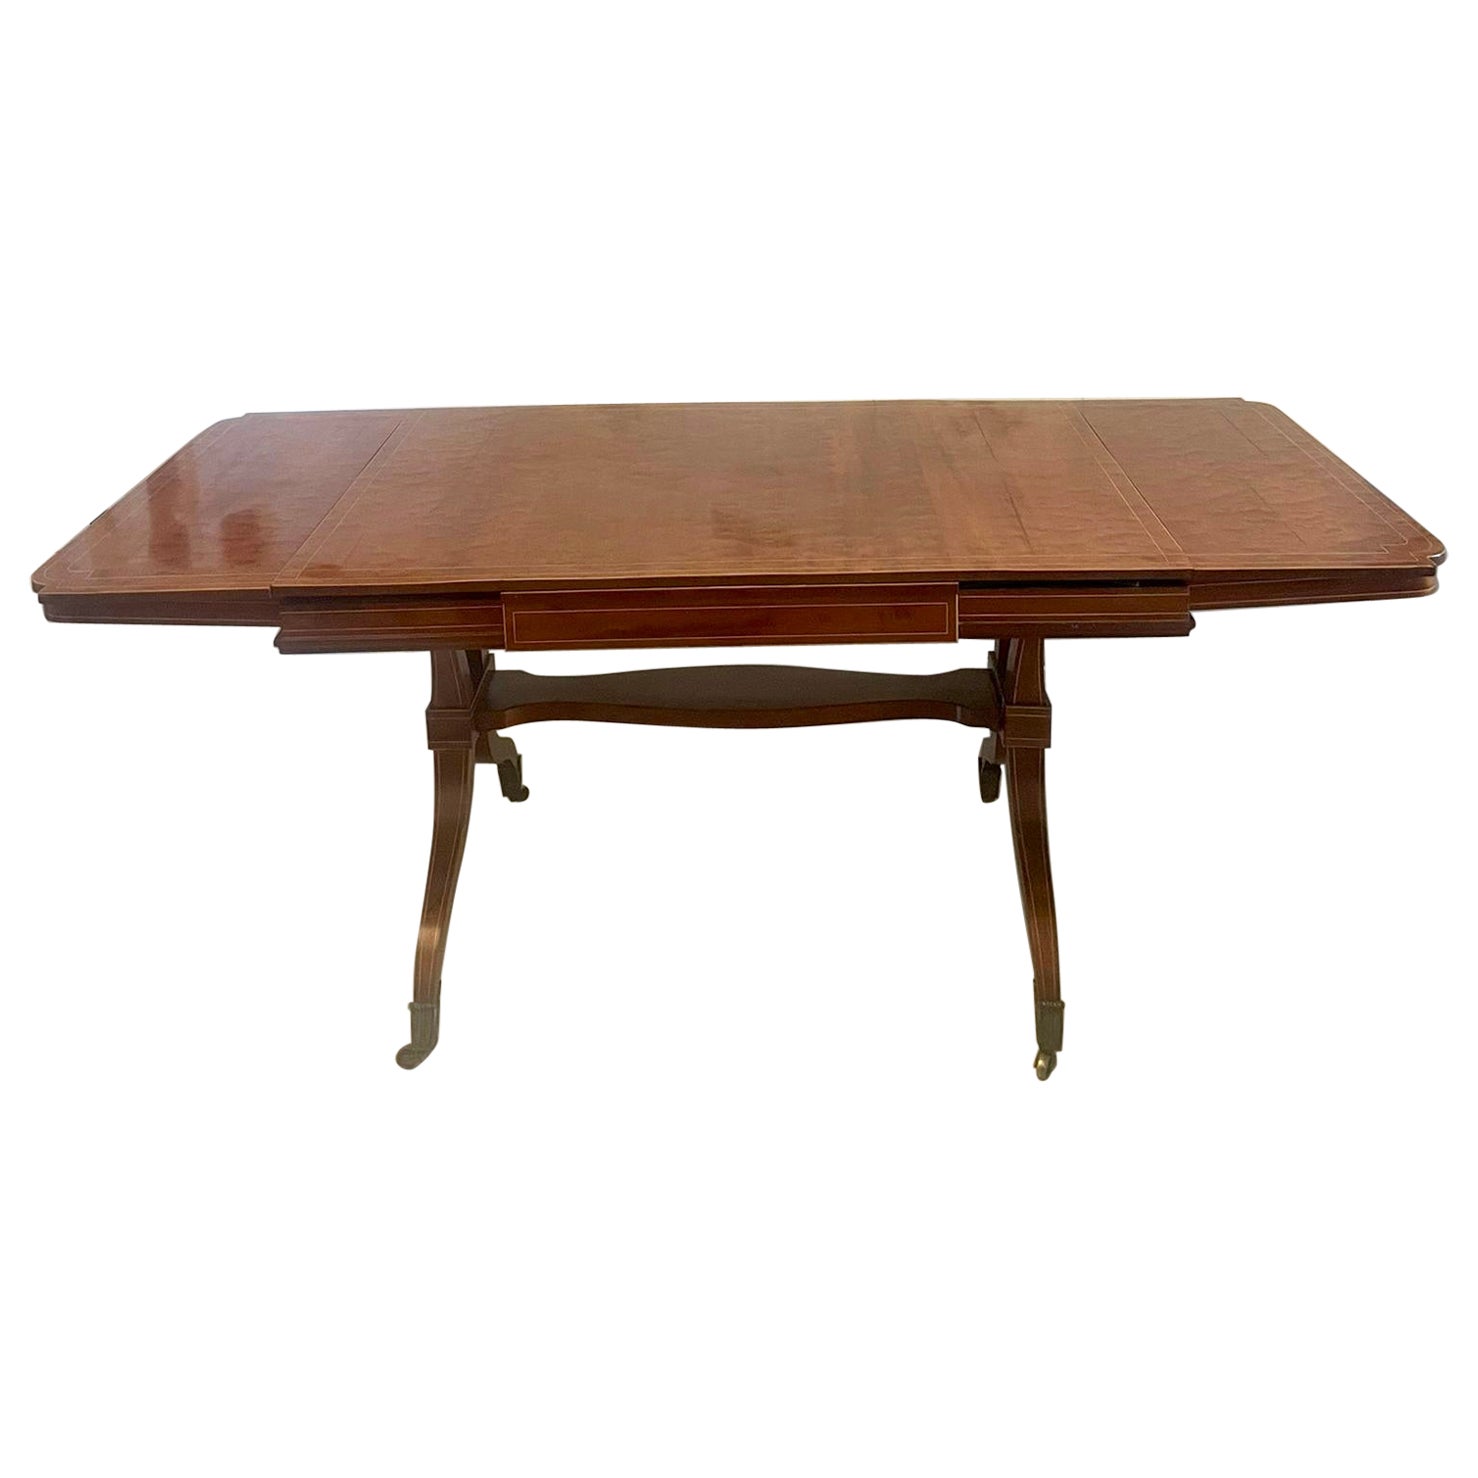 Unusual Antique Mahogany And Satinwood Inlaid Freestanding Sofa/ Dining Table For Sale